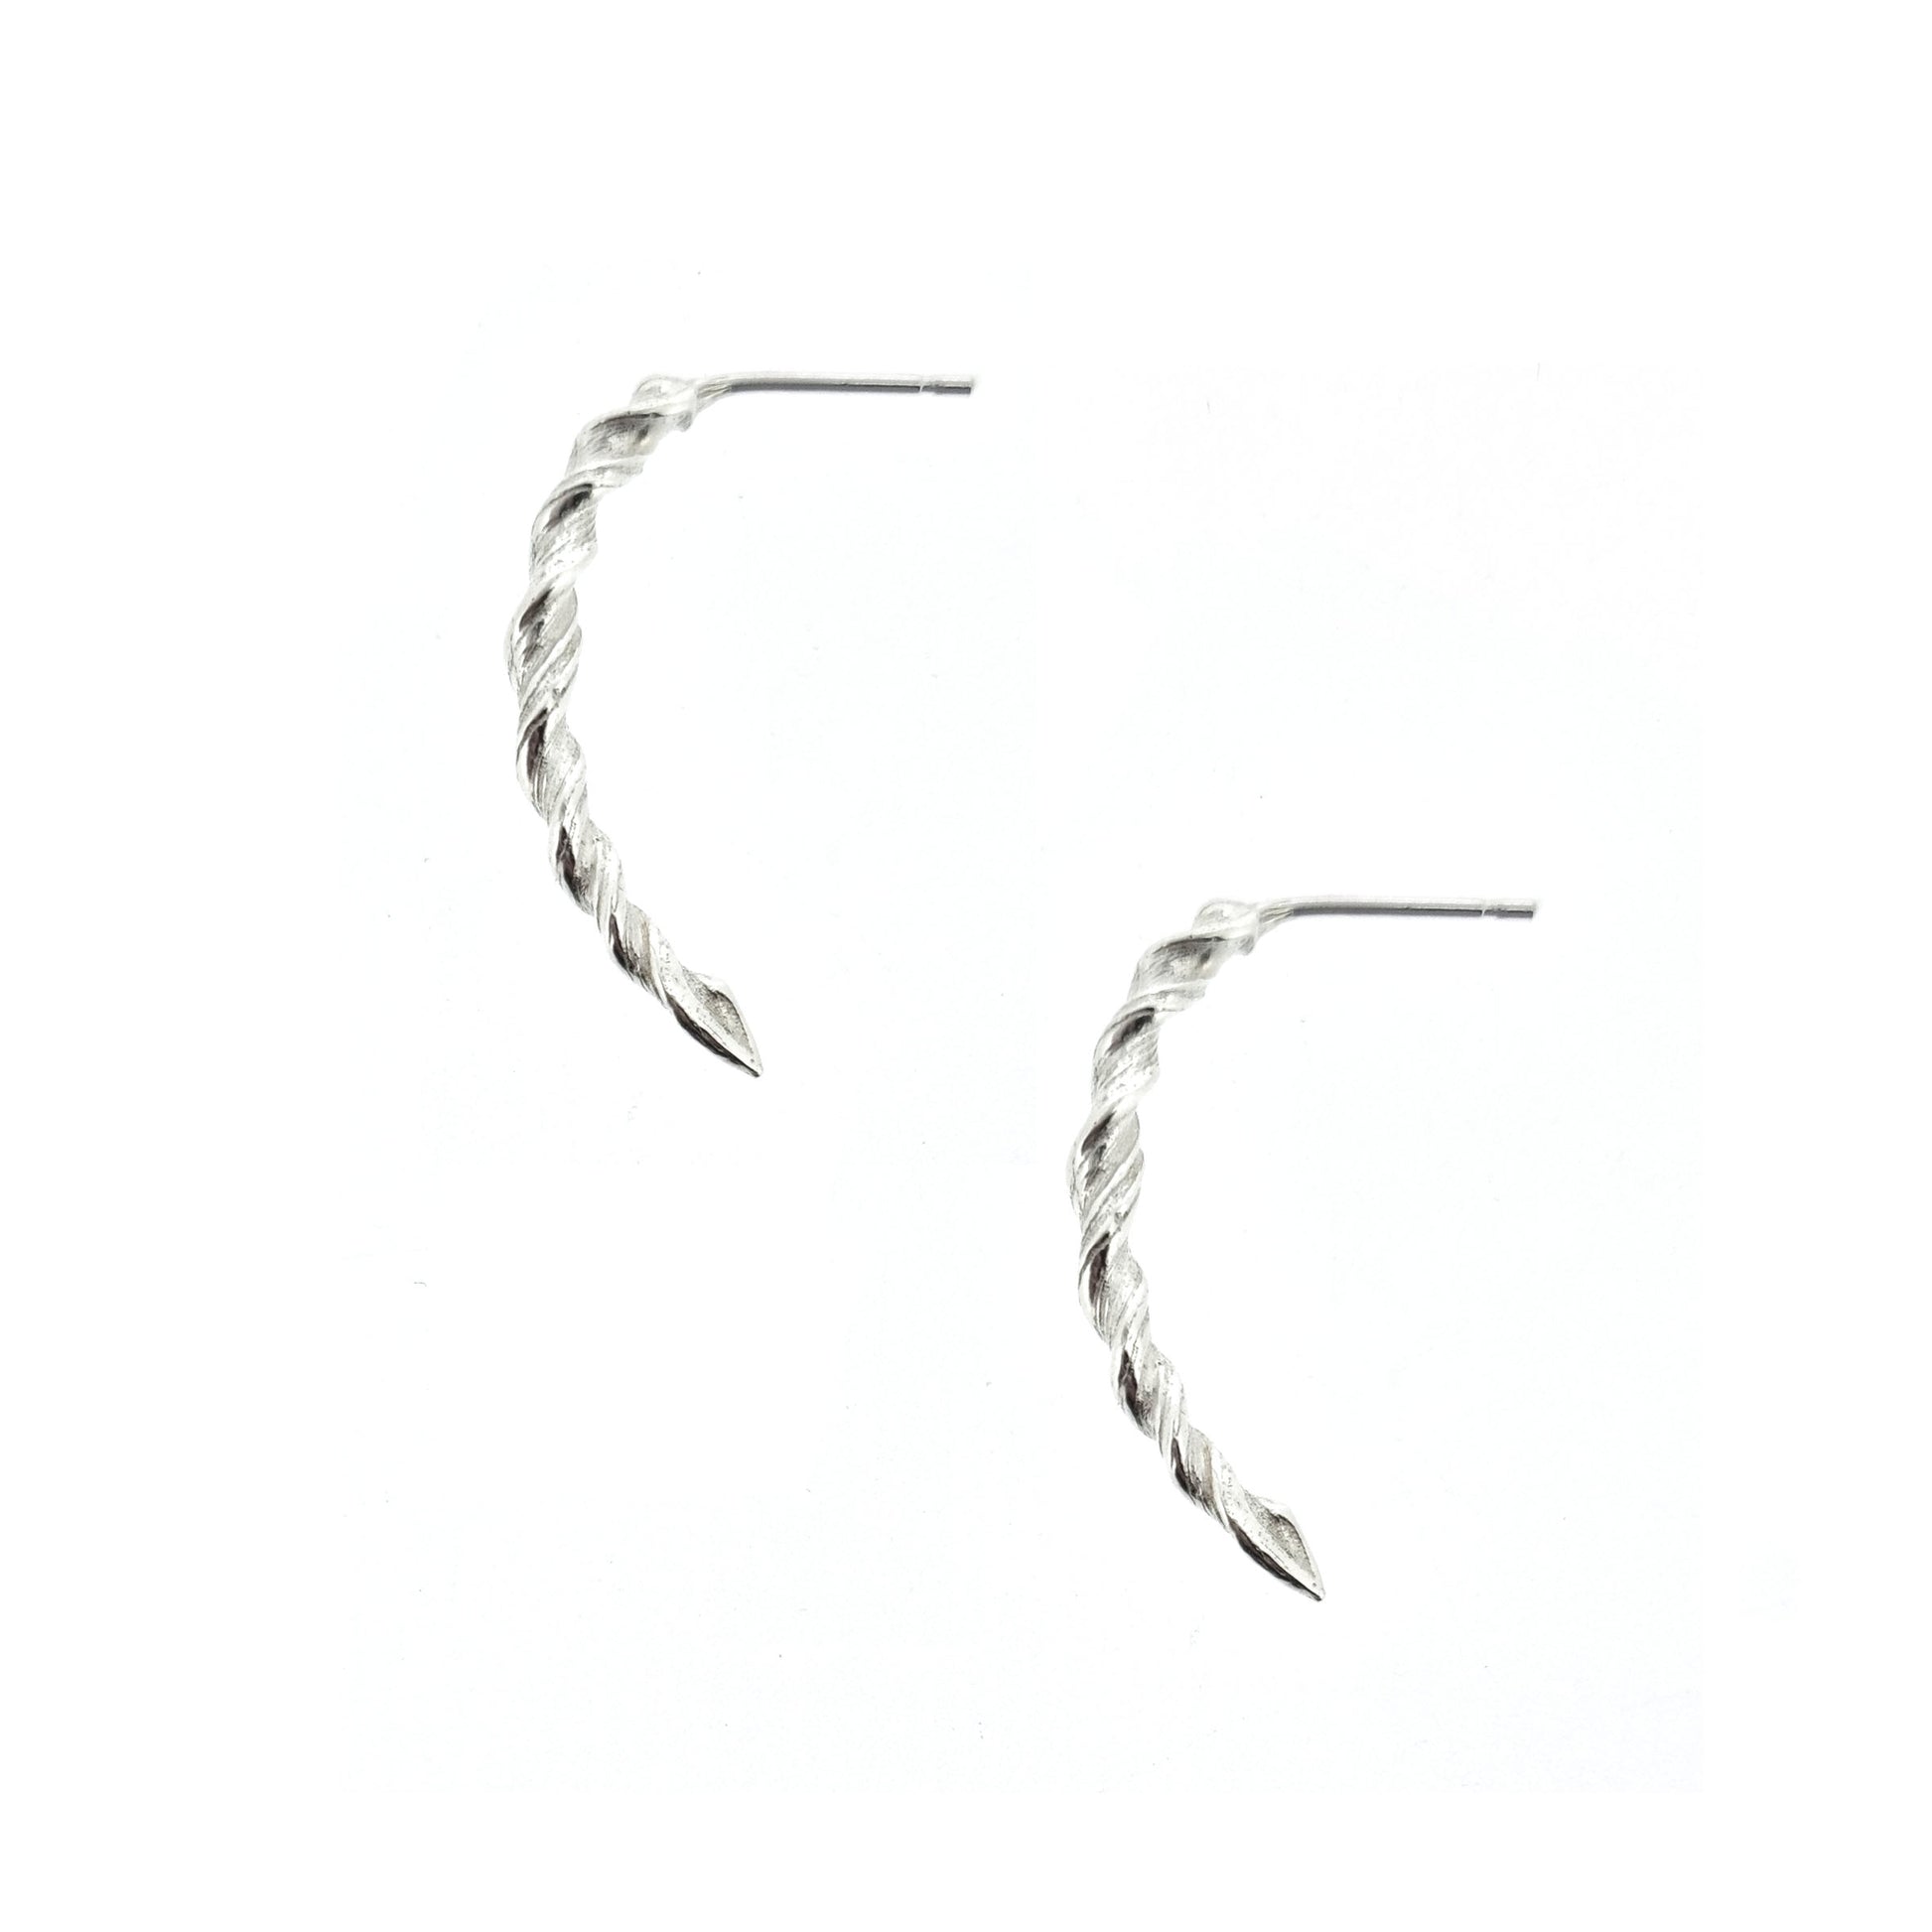 Silver twist curved drop earrings with post fitting.